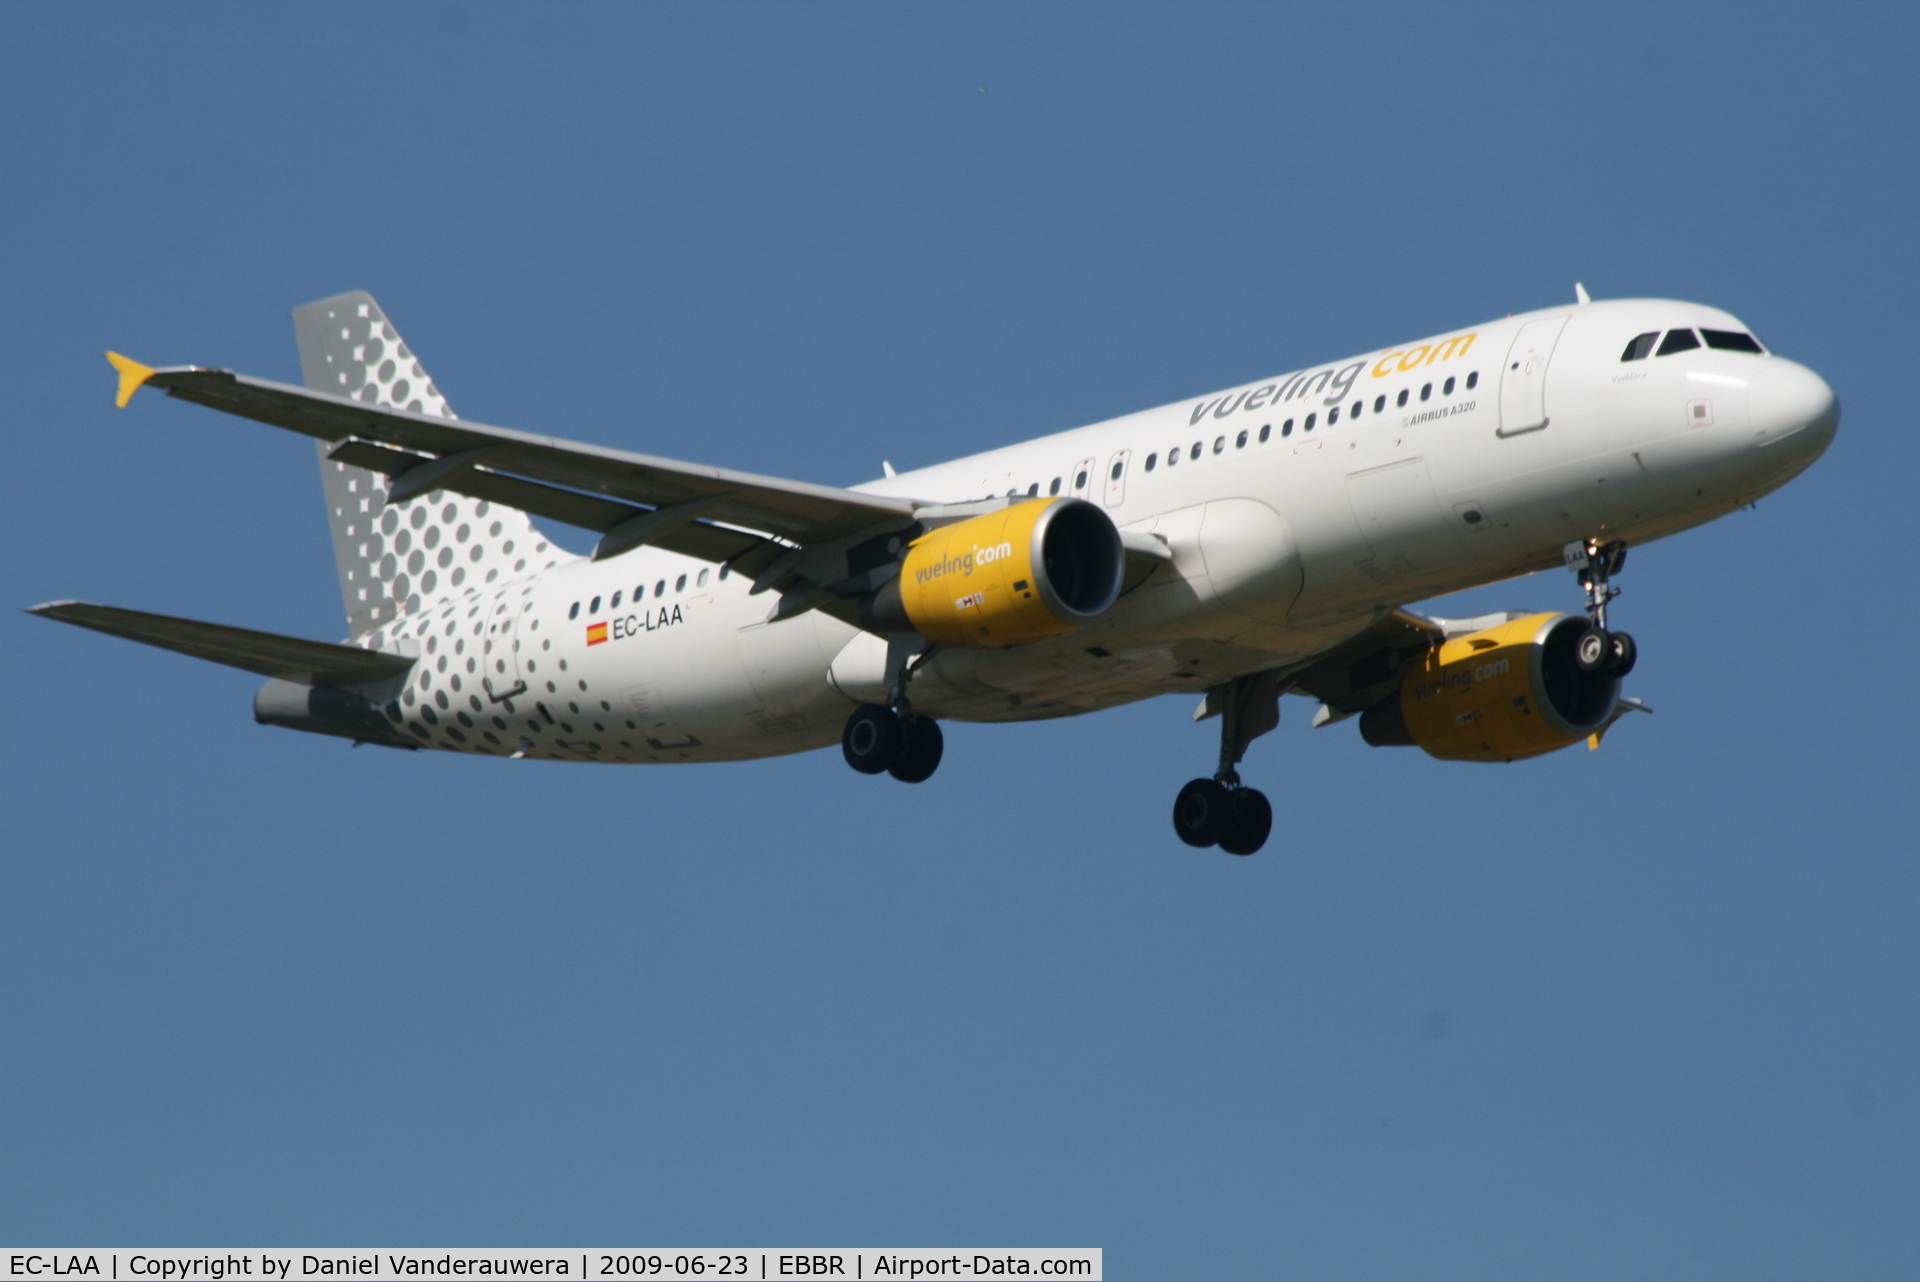 EC-LAA, 2006 Airbus A320-214 C/N 2678, Arrival of flight VY7060 to RWY 02